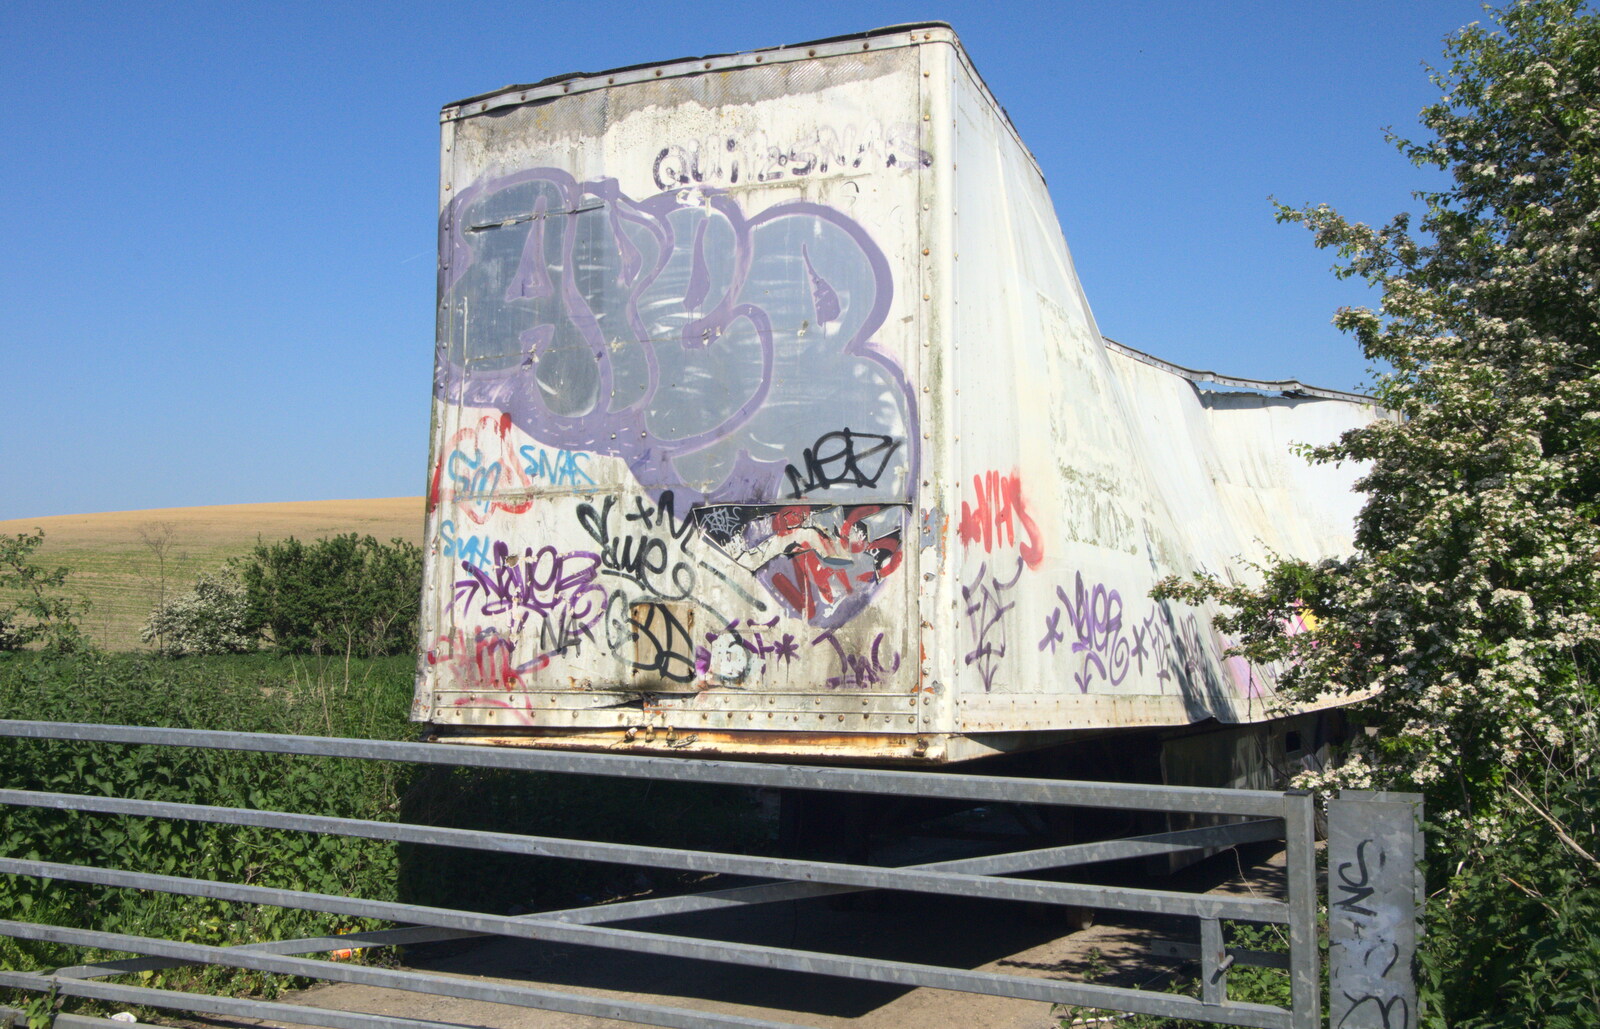 The derelict HGV trailer off the A140 from Rural Norfolk Dereliction and Graffiti, Ipswich Road, Norwich - 27th May 2012